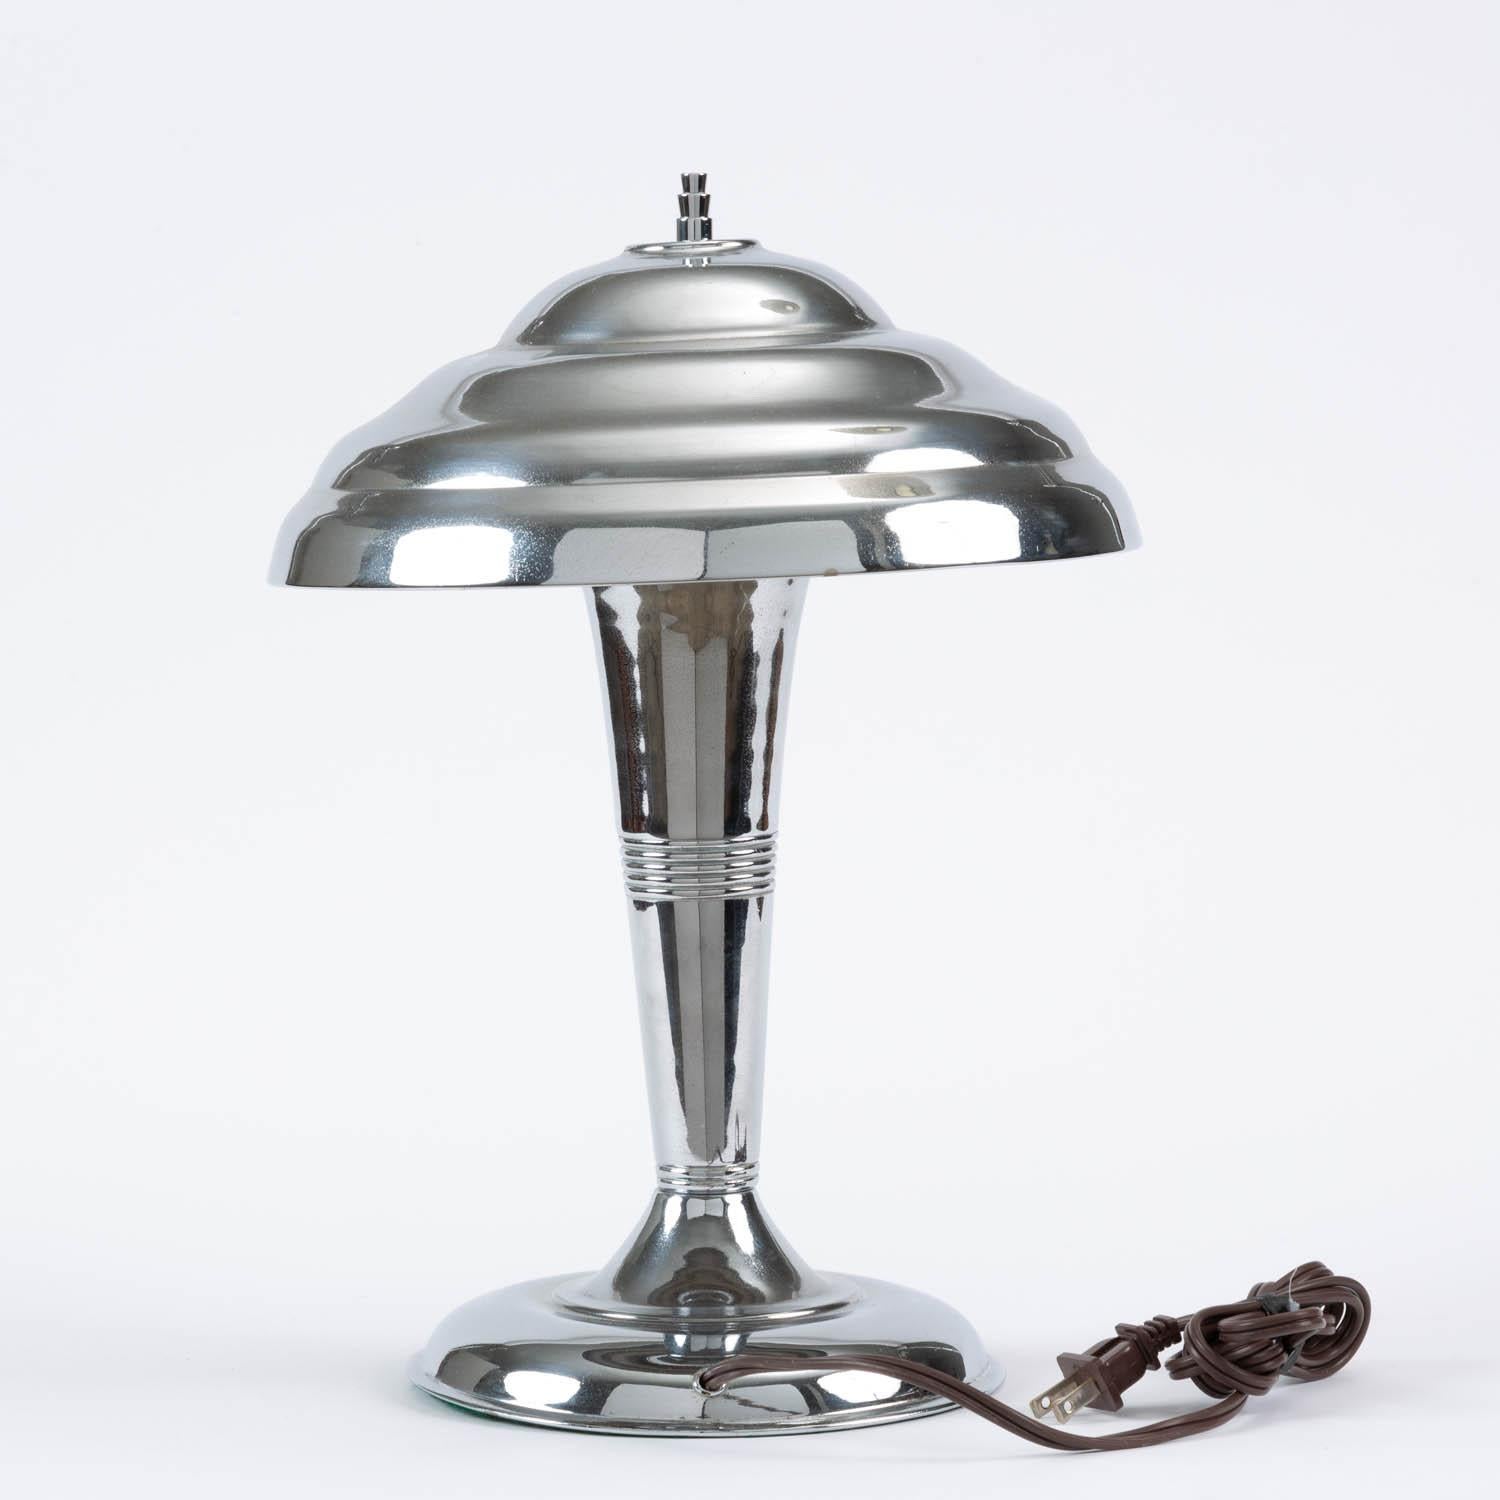 American Chrome Art Deco Table Lamp with Saucer Shade